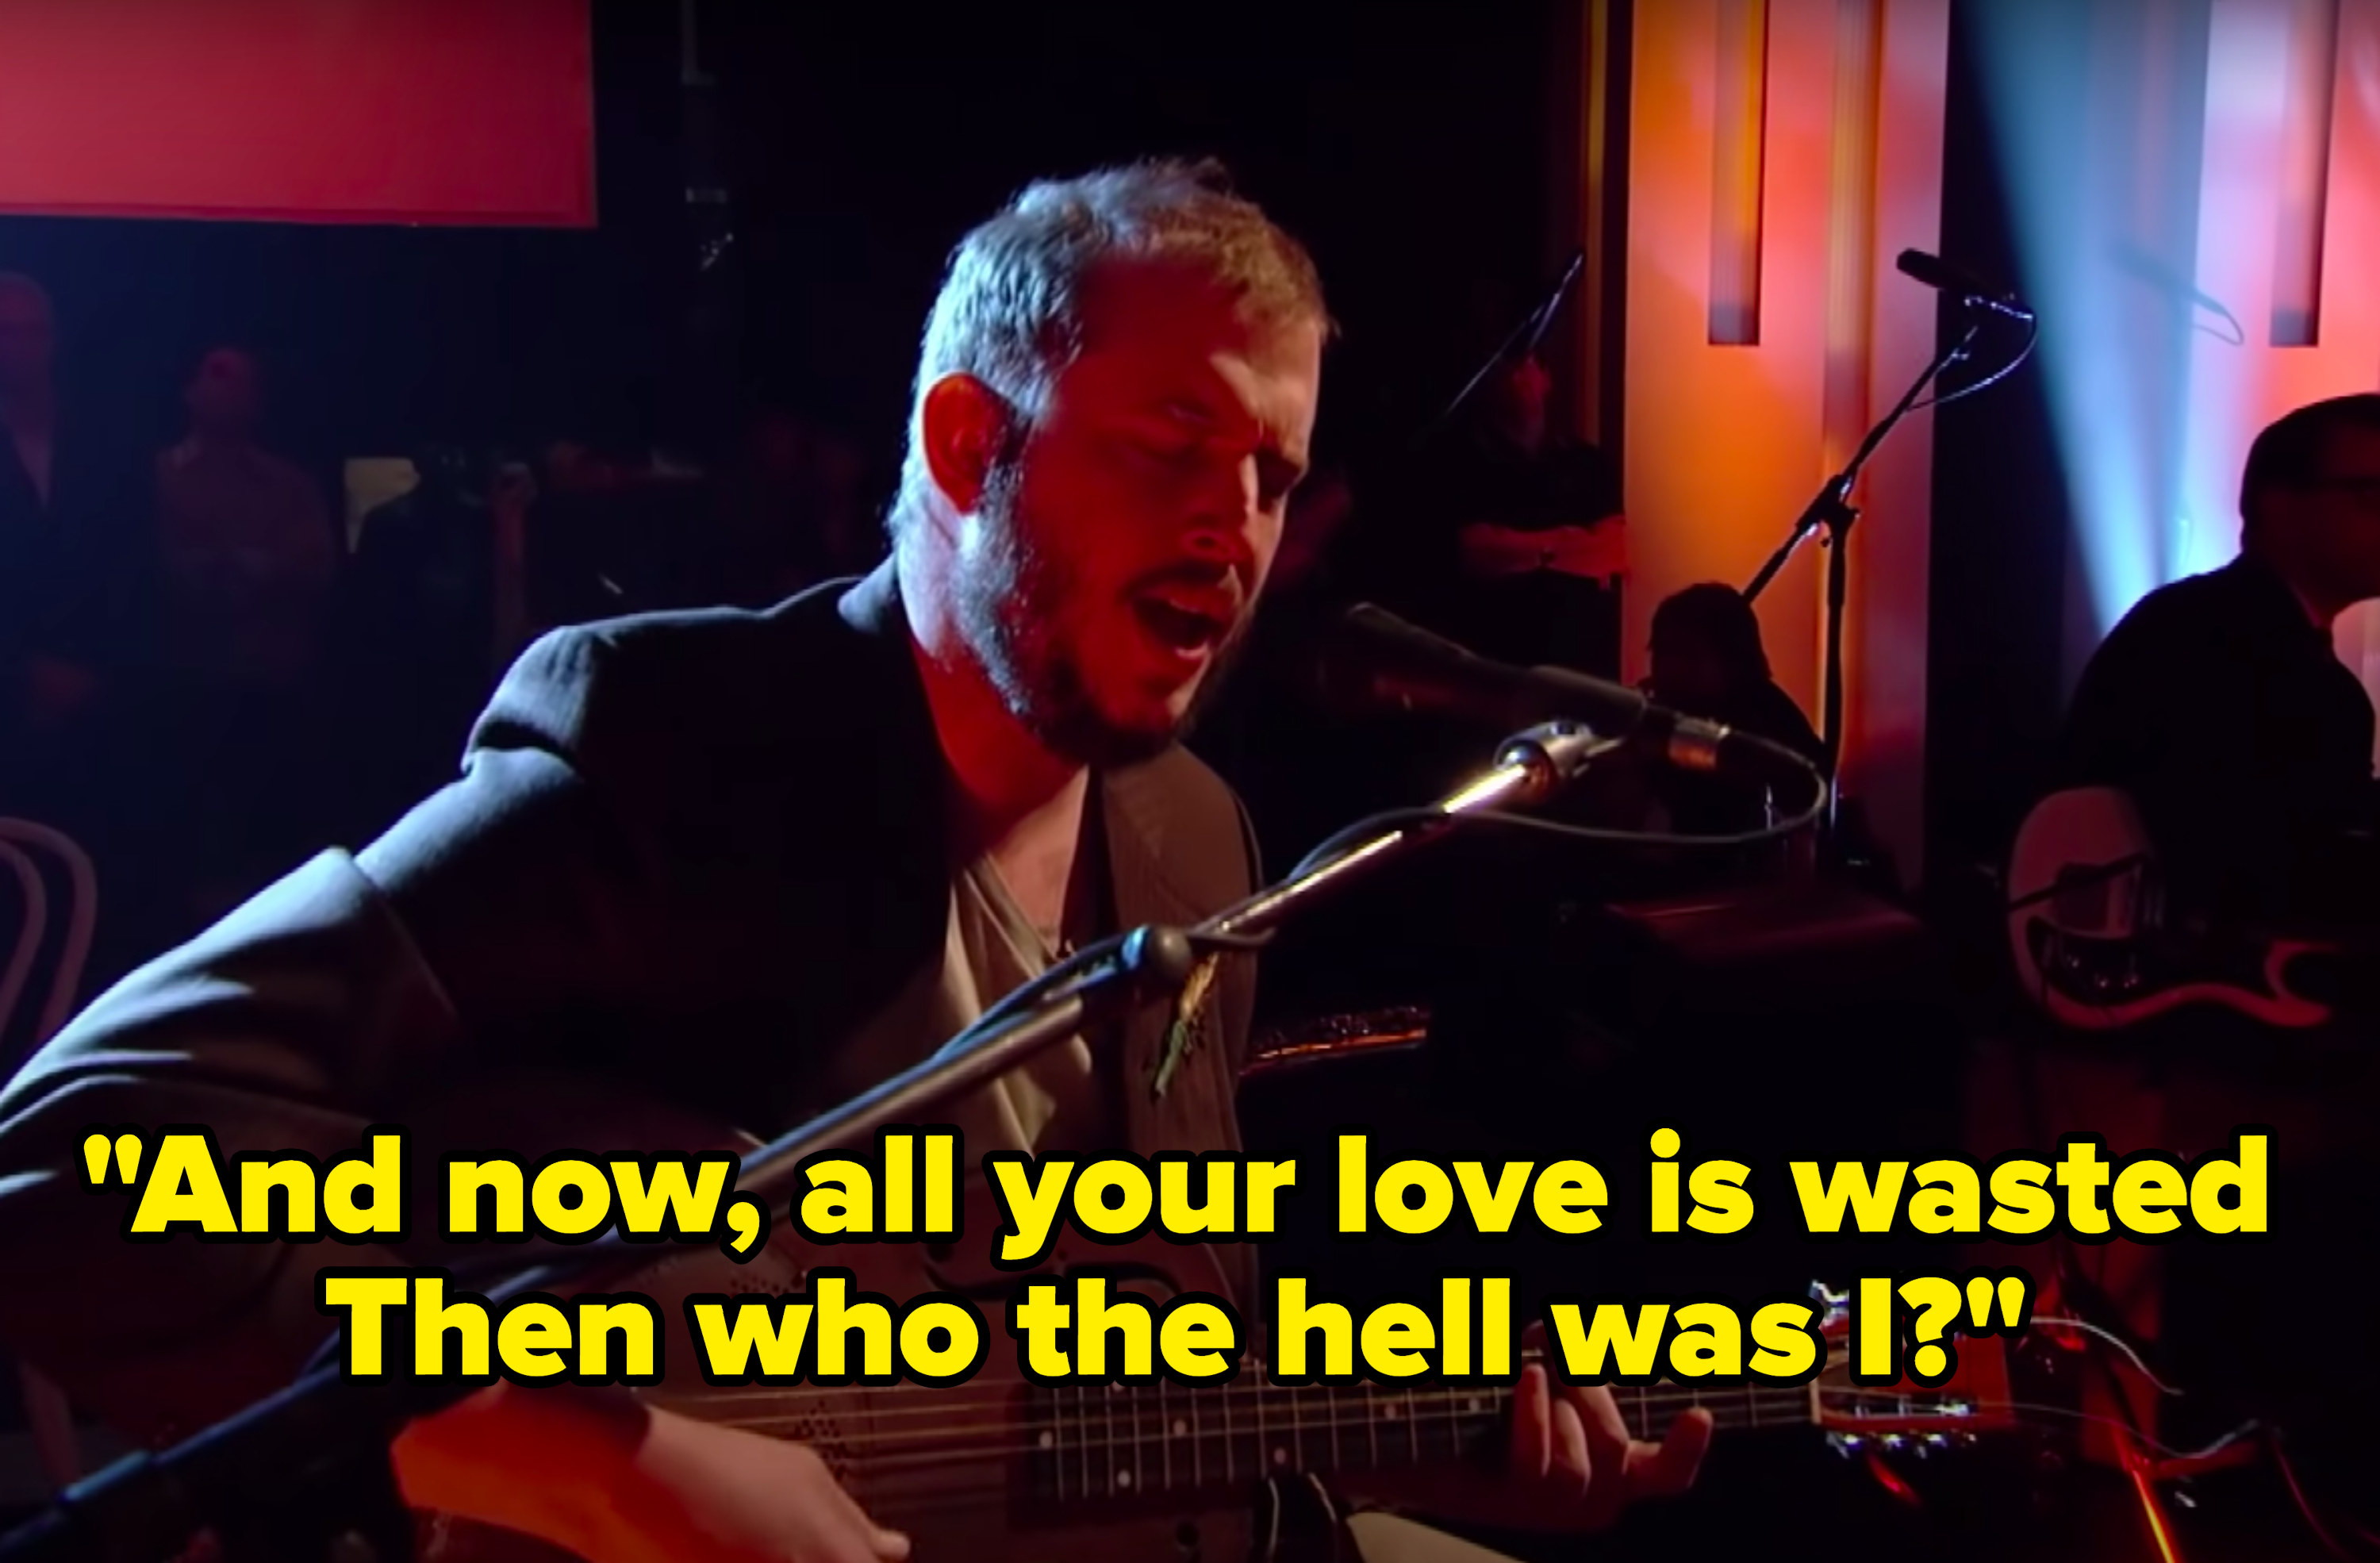 Still from the music video with the lyric: &quot;And now, all your love is wasted, then who the hell was I?&quot;